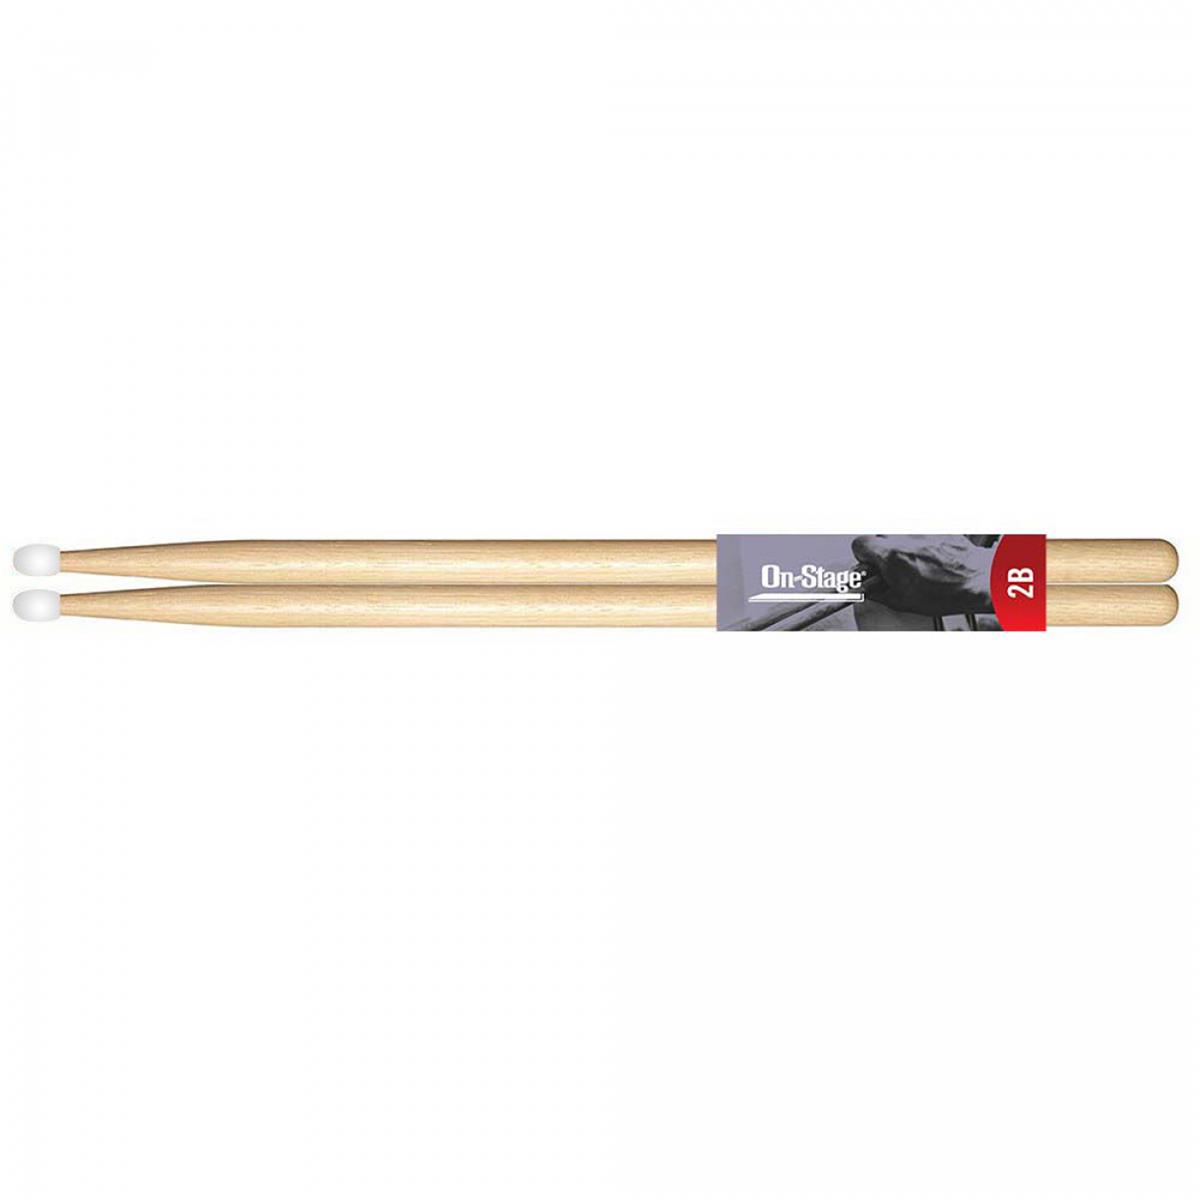 Image of On-Stage ON-Stage AMH2BN American Made Hickory Drumsticks